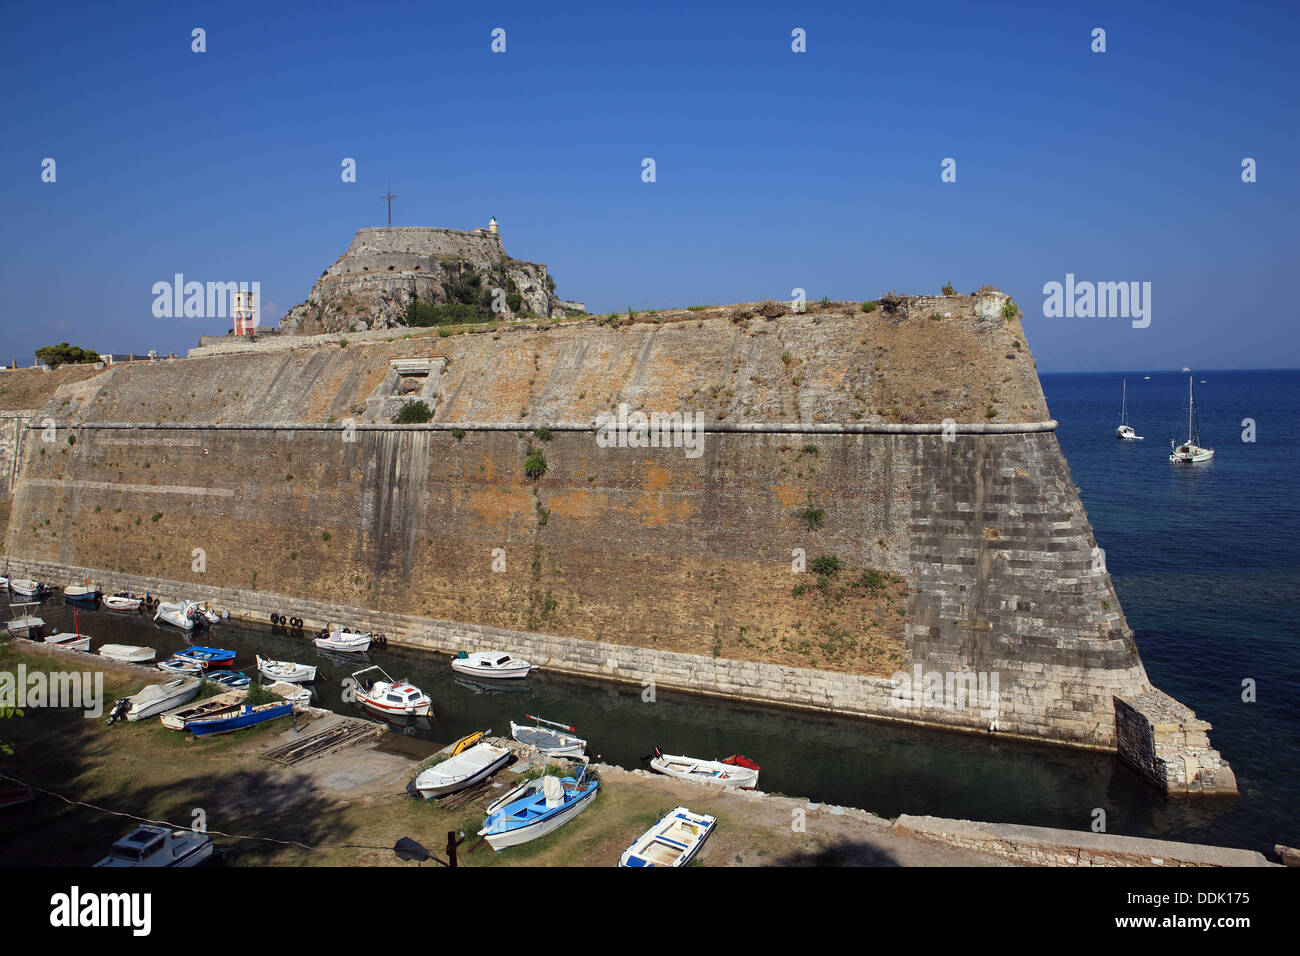 The high and steep defense walls of the Old Fortress in Corfu Town in Greece which is built on a rocky peninsula. Stock Photo